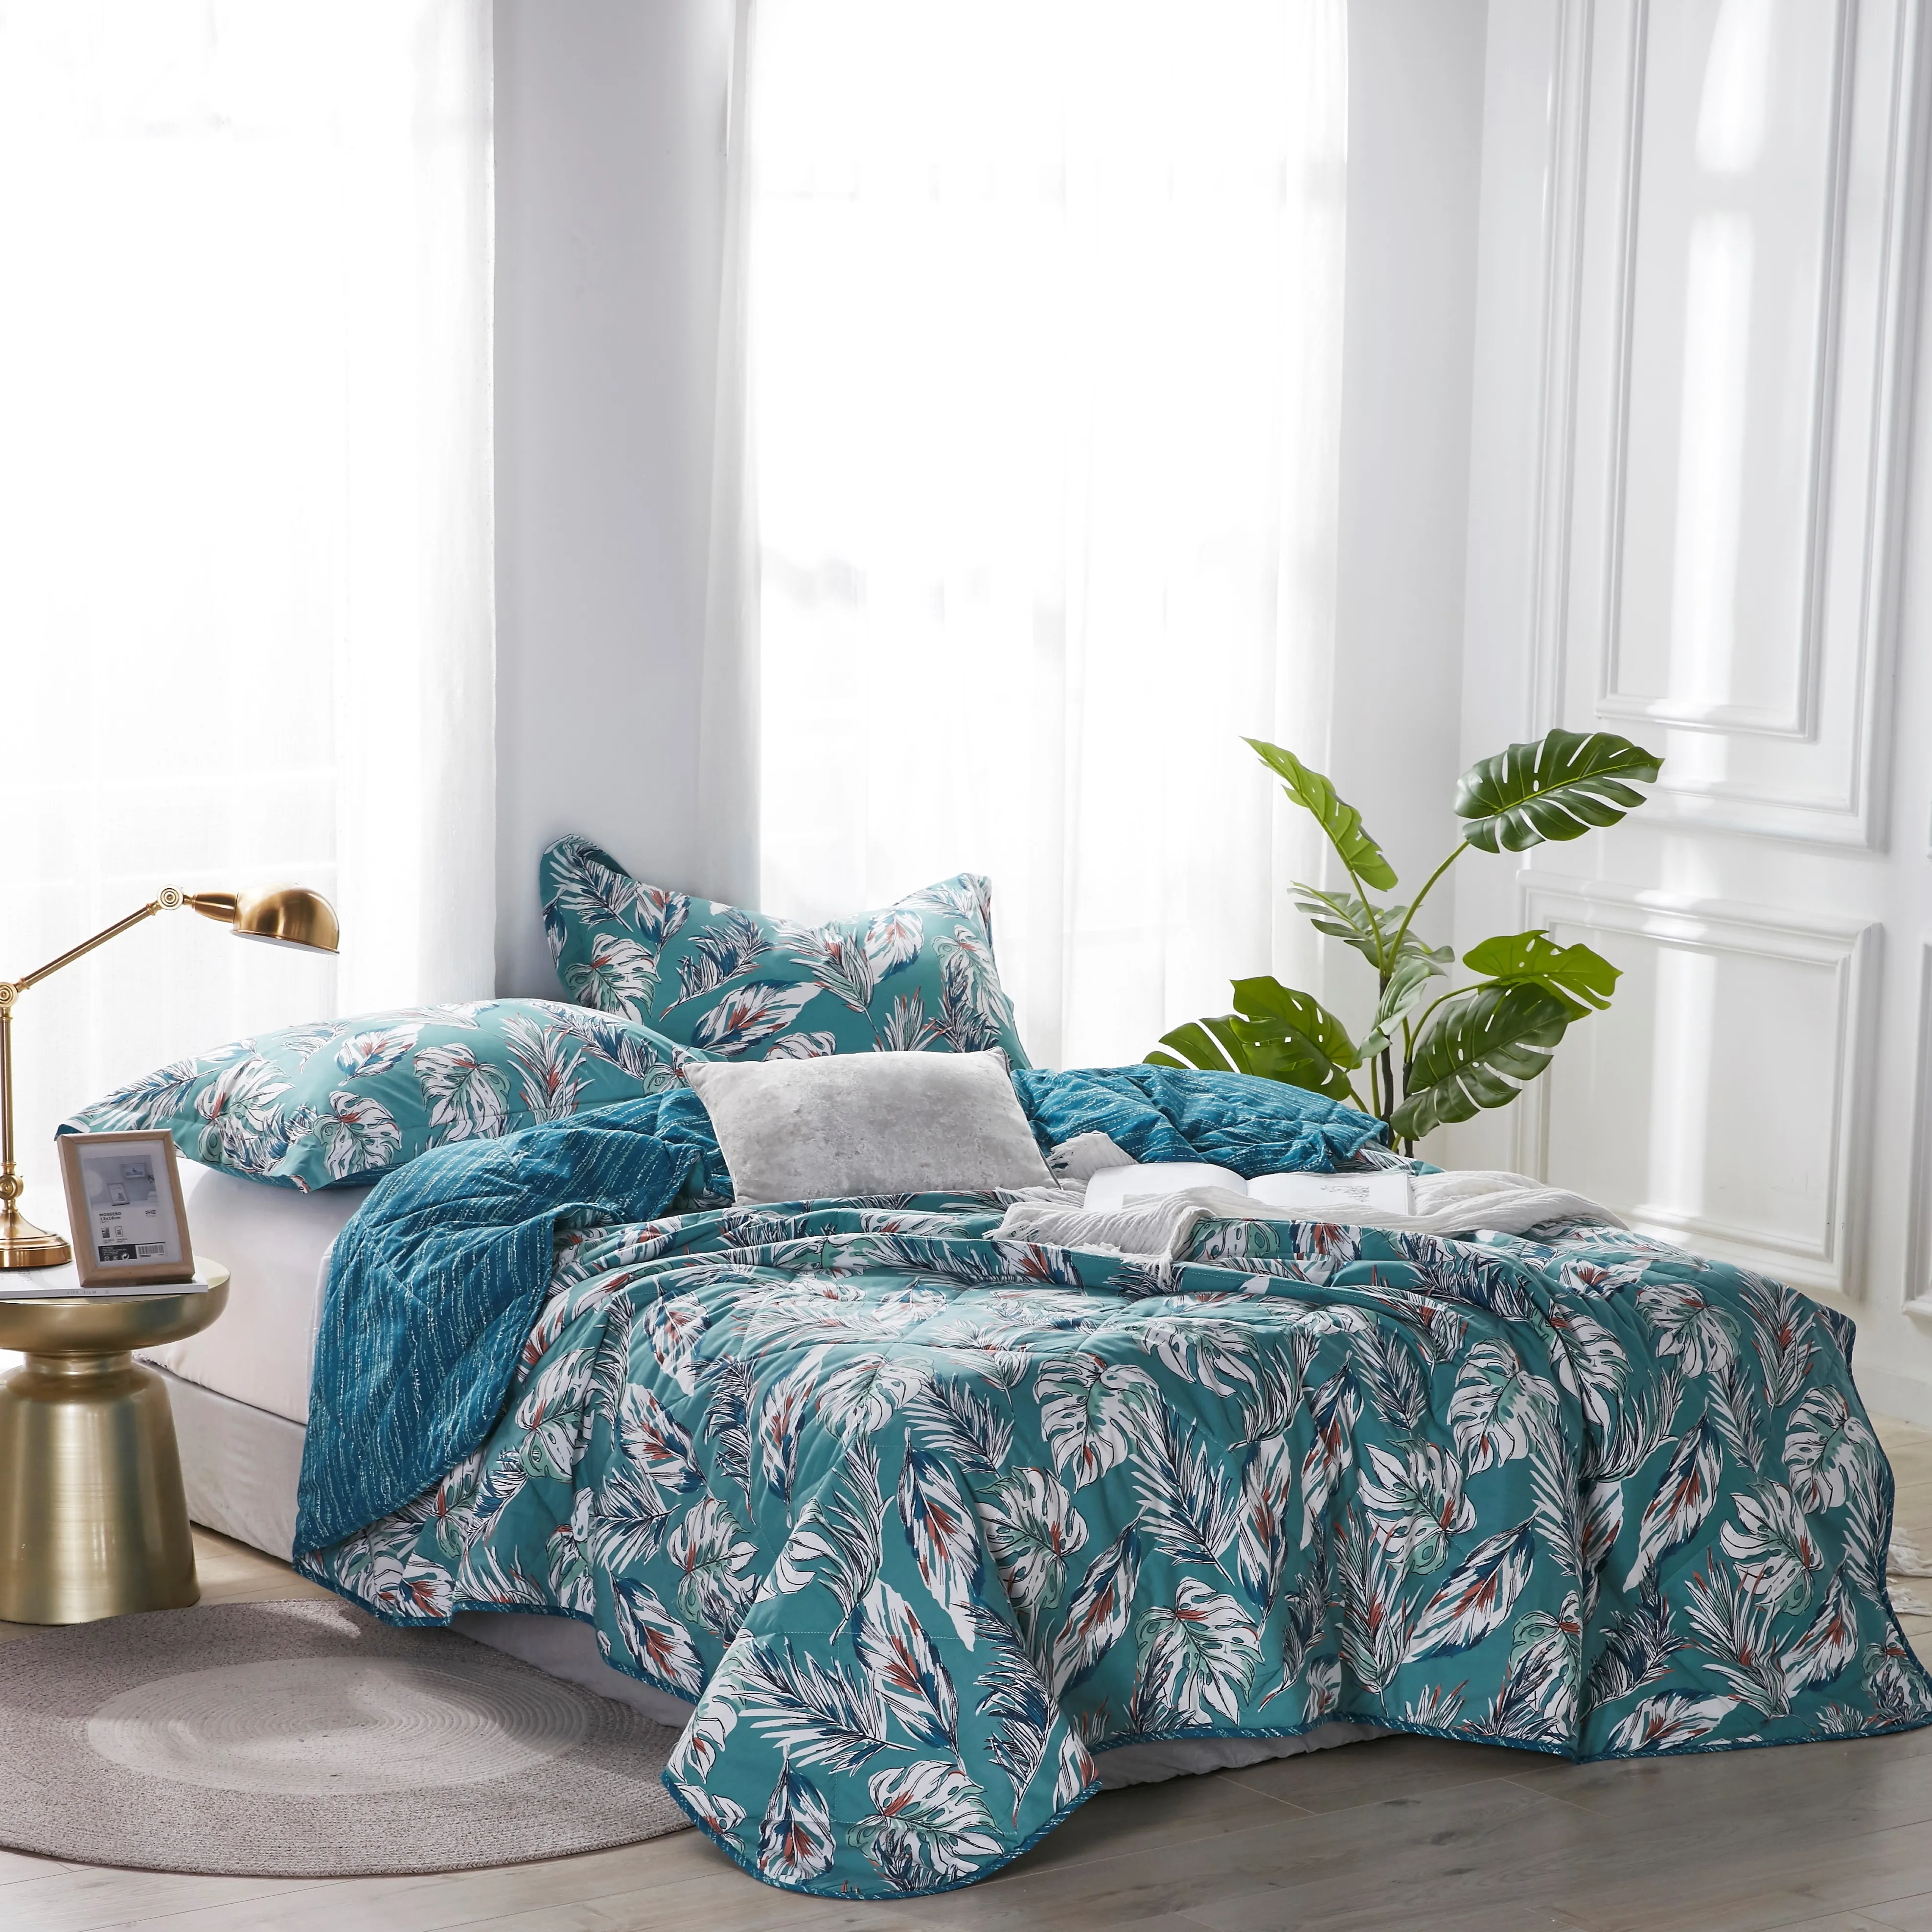 

Comfortable Cotton Adult Air-Conditioned Coverlets Quilt Bed Cover Bedspread Printed Comforter Available In All Seasons